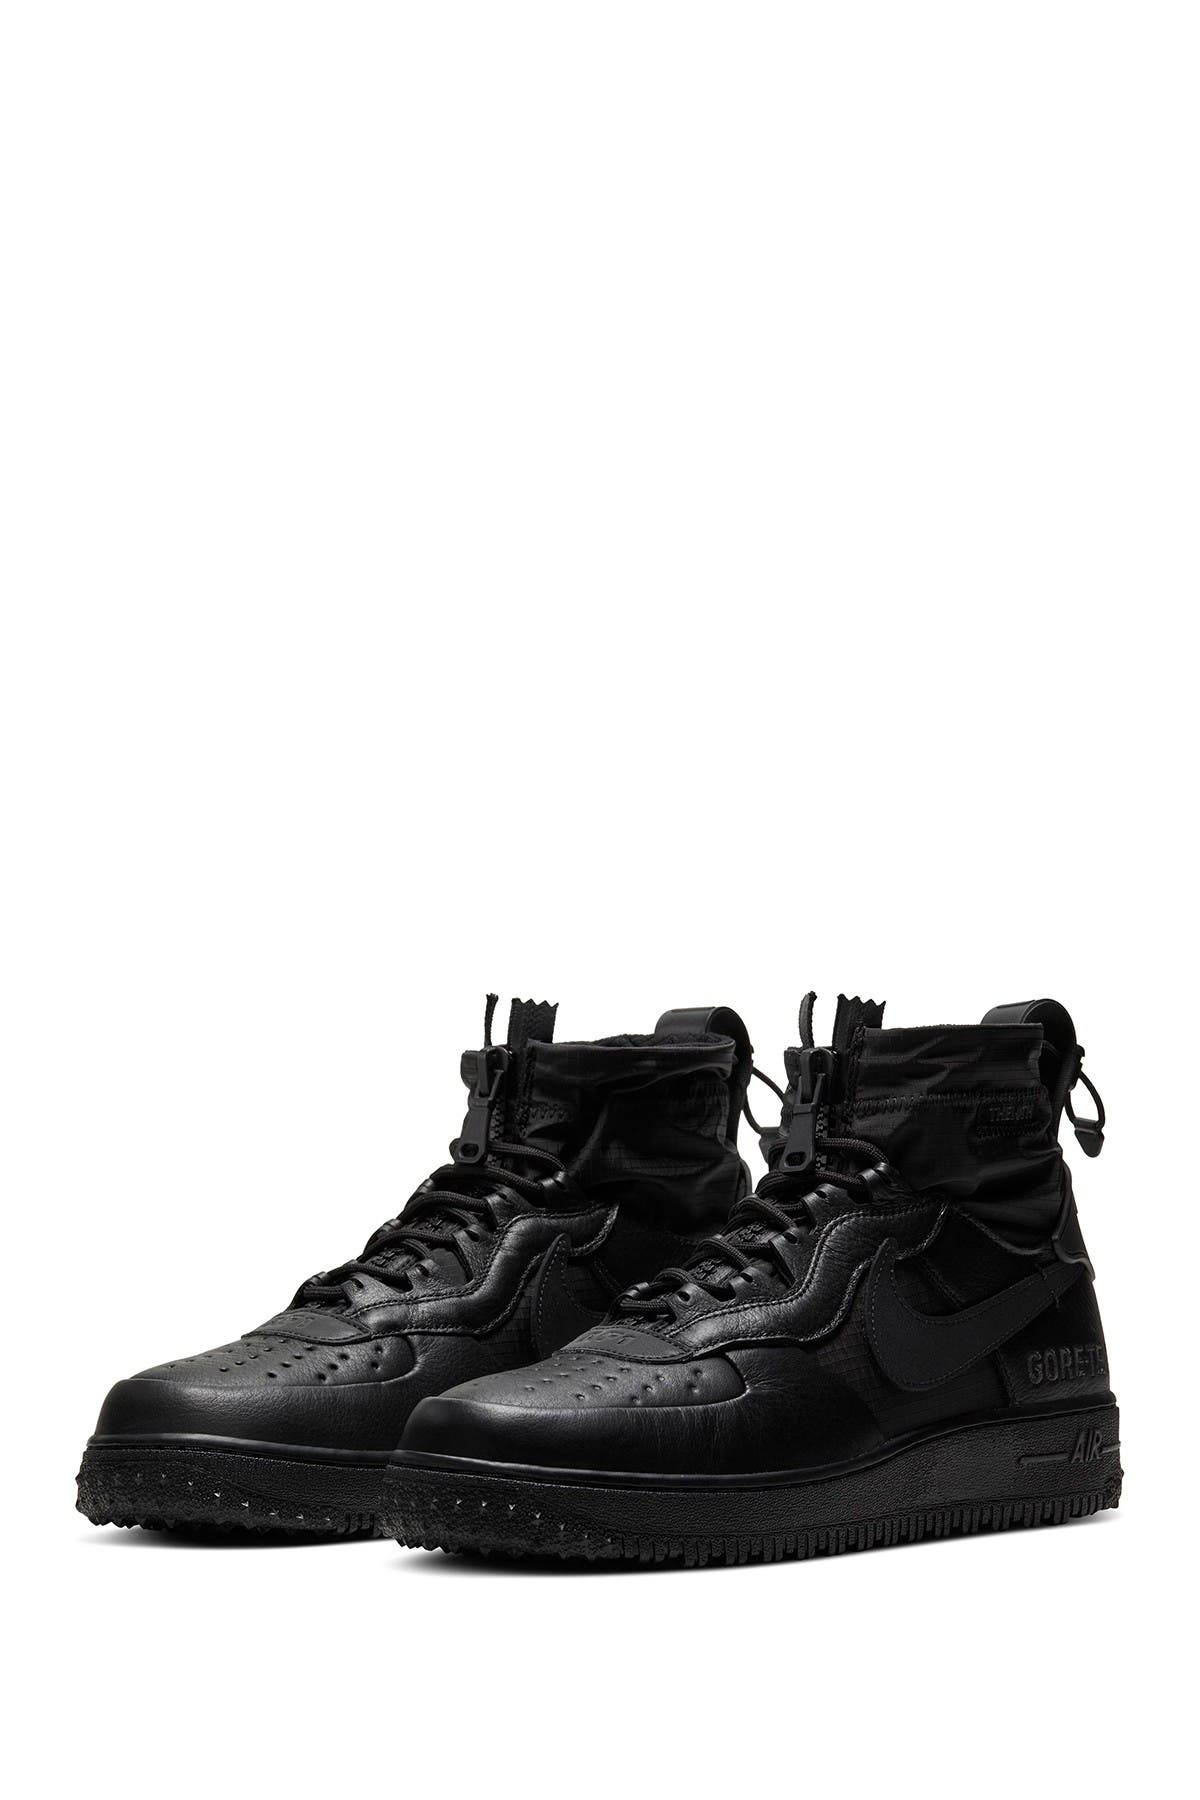 air force 1 winter boot